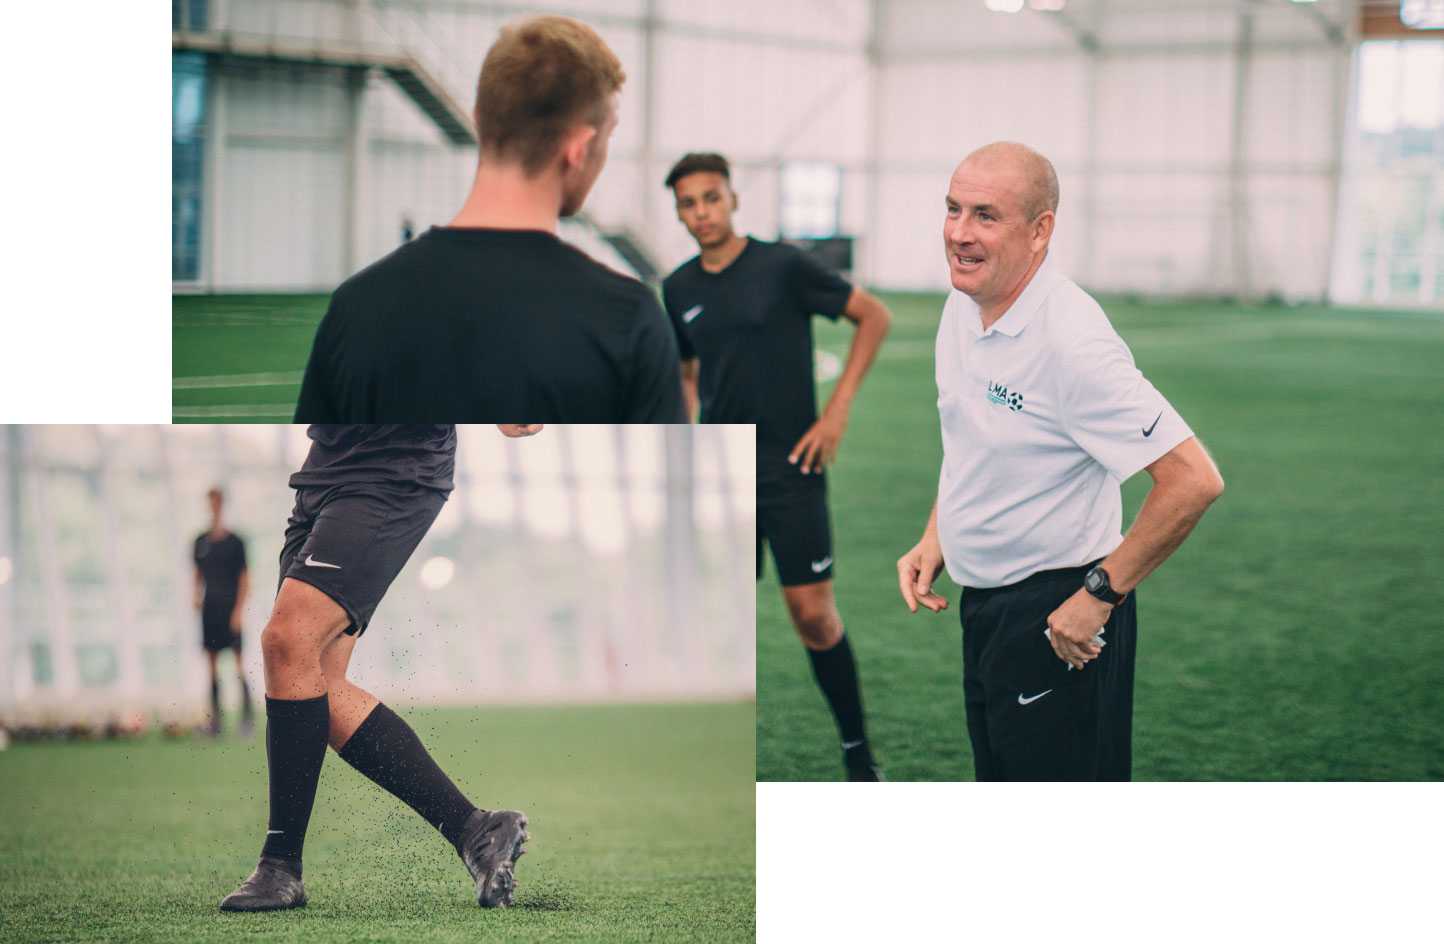 Coach Mark Warburton joking with a player and a player kicking a ball